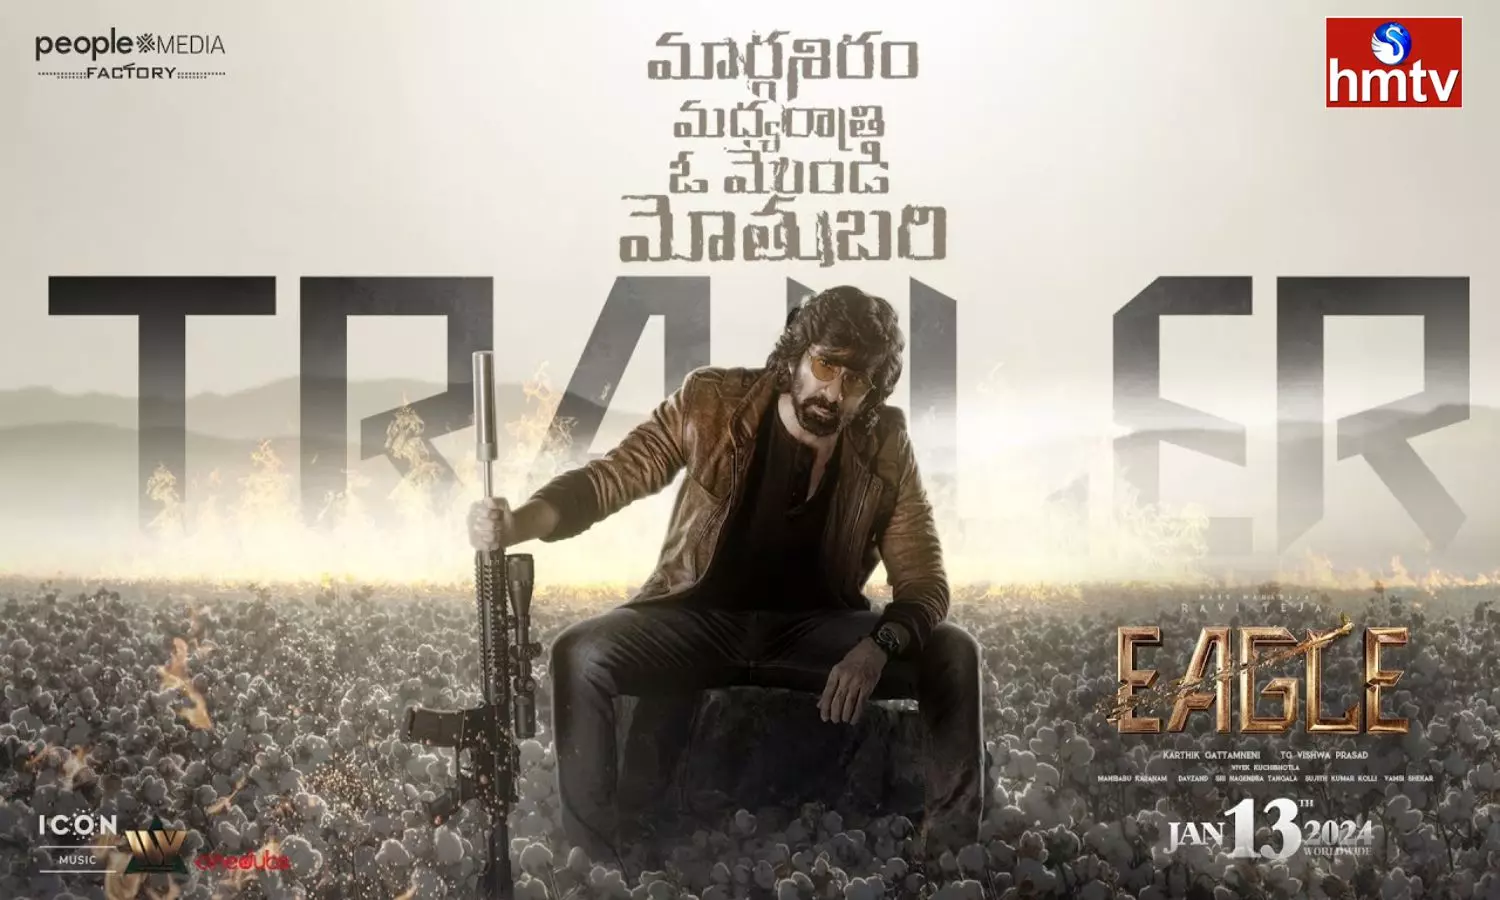 Eagle Movie Trailer Released Ravi Teja Action And Dialogues Are Powerful